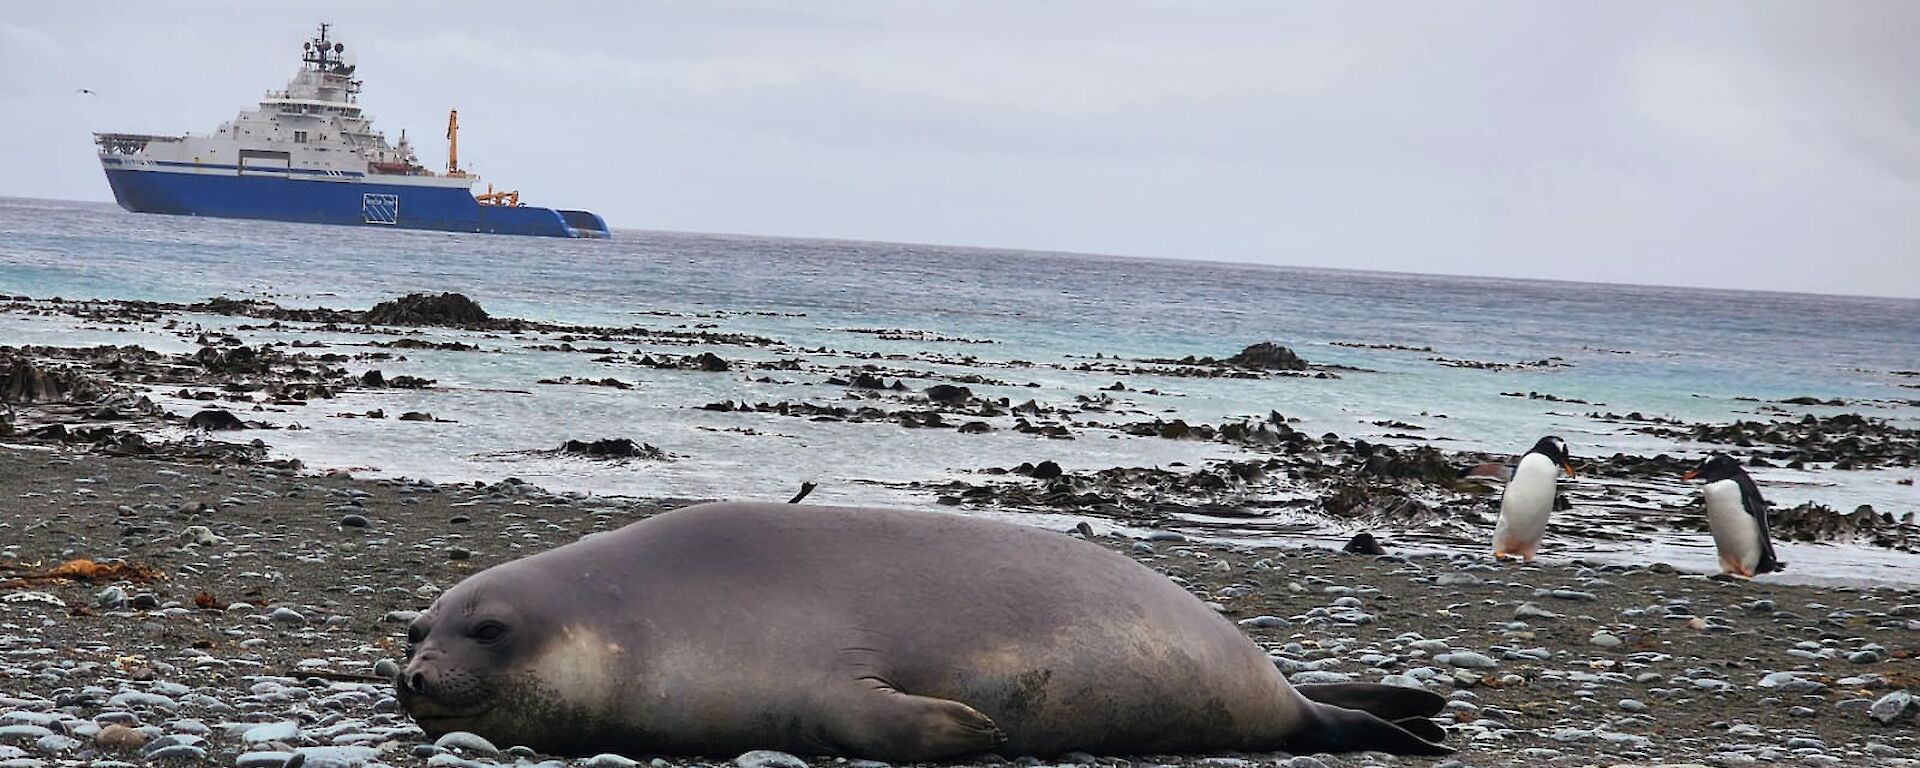 Voyage 7 resupply vessel MPV AIVIQ in Buckles Bay, with a southern Elephant Seal in the foreground.